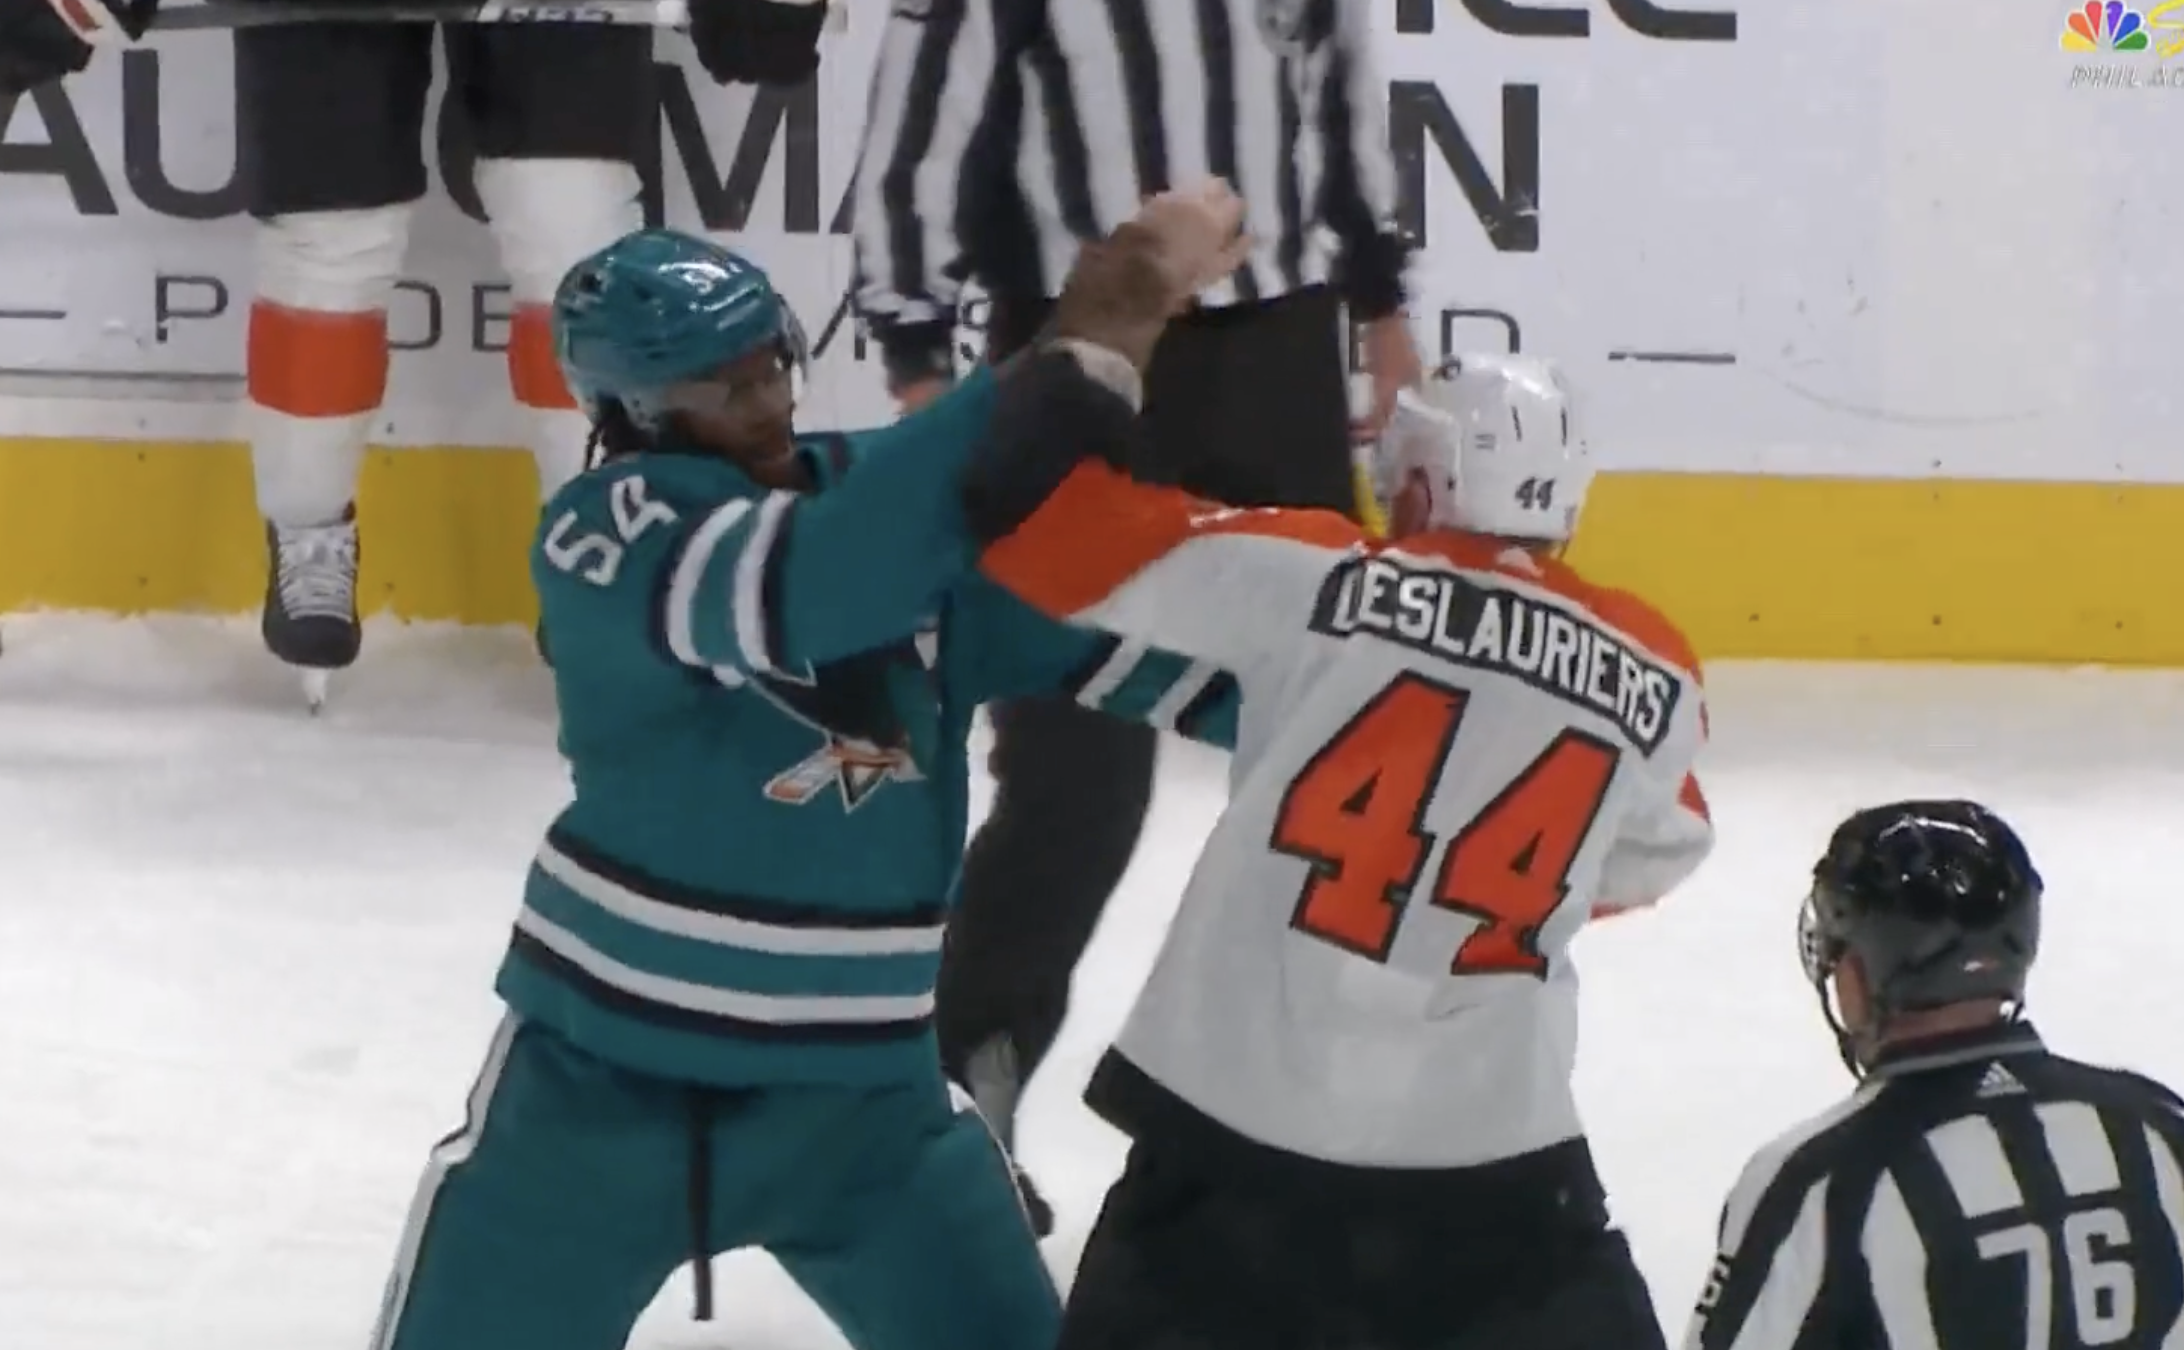 Nicolas Deslauriers of the Philadelphia Flyers fights with Givani Smith of the San Jose Sharks.